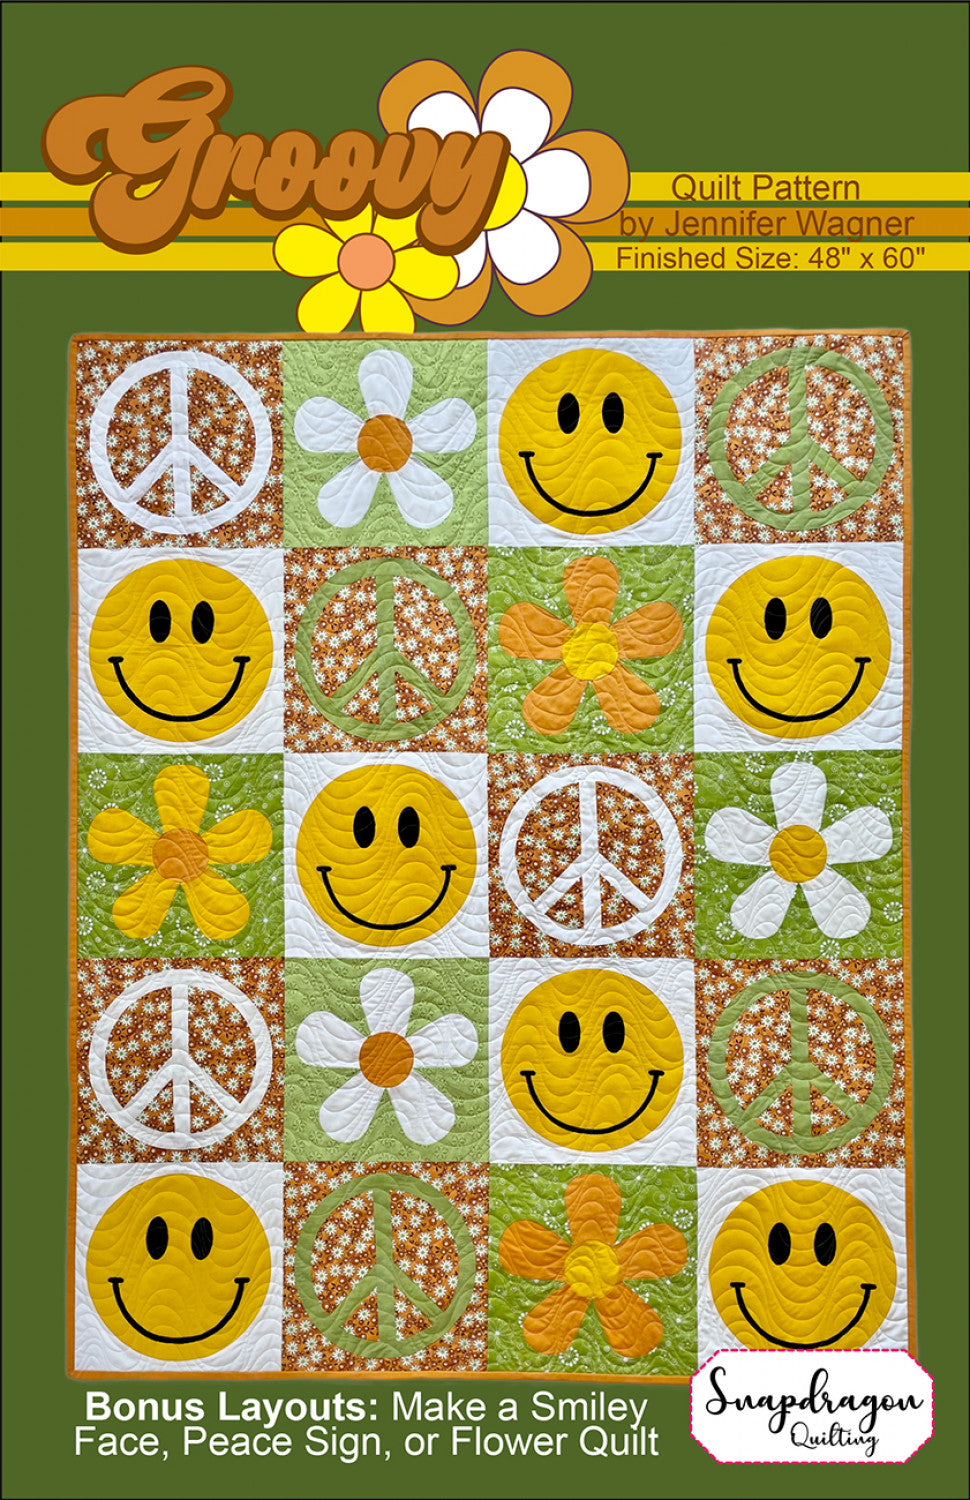 Groovy Quilt Pattern by Snapdragon Quilting